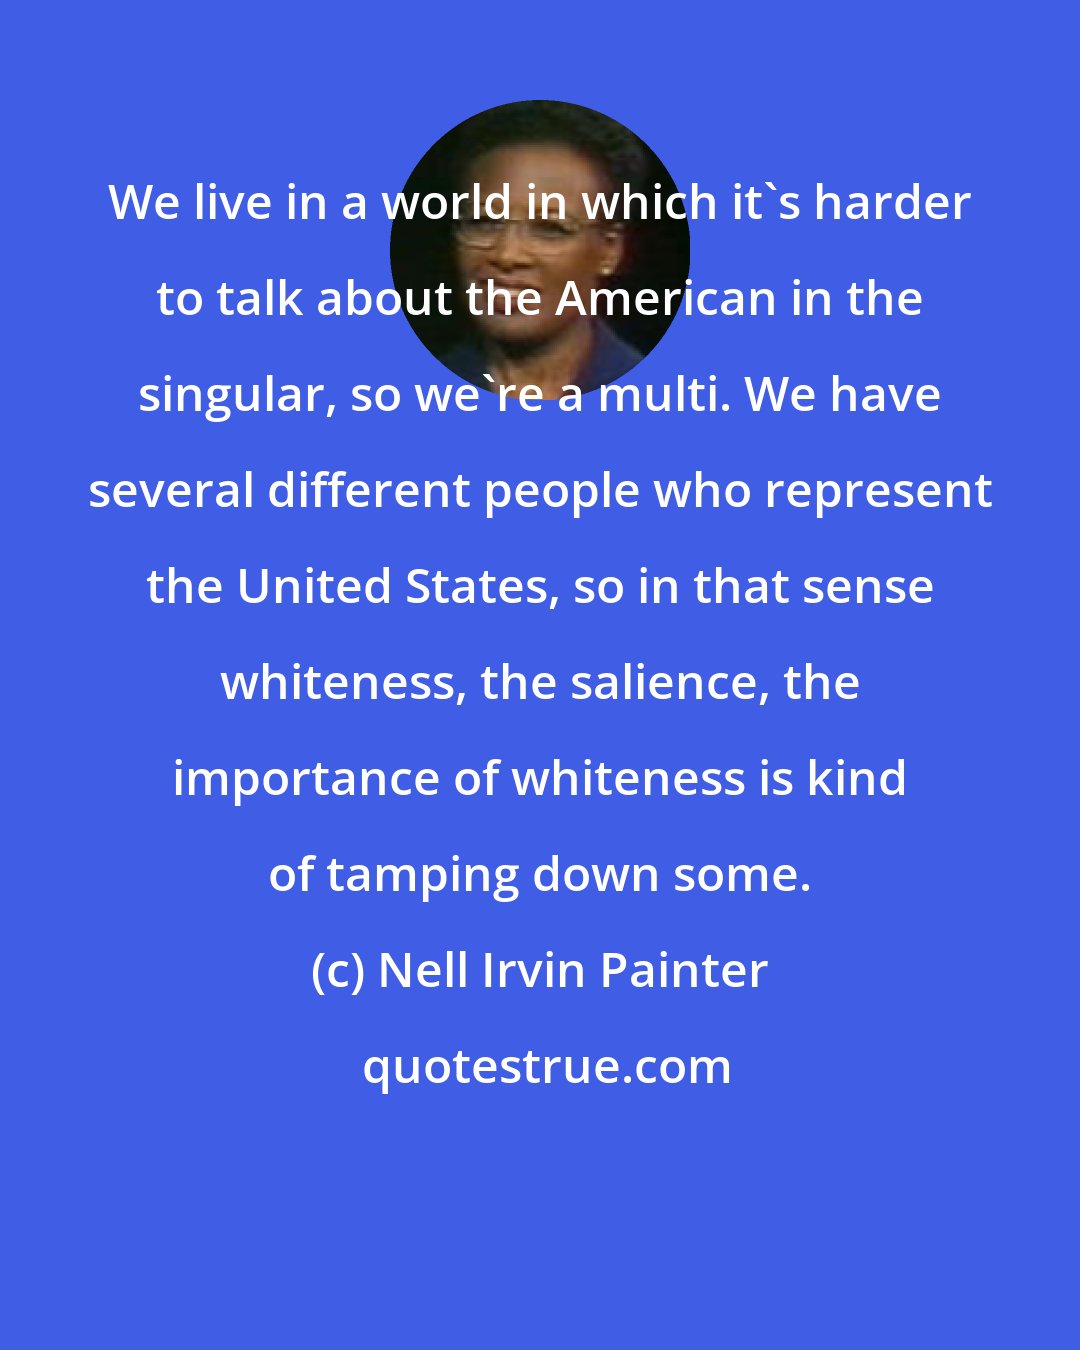 Nell Irvin Painter: We live in a world in which it's harder to talk about the American in the singular, so we're a multi. We have several different people who represent the United States, so in that sense whiteness, the salience, the importance of whiteness is kind of tamping down some.